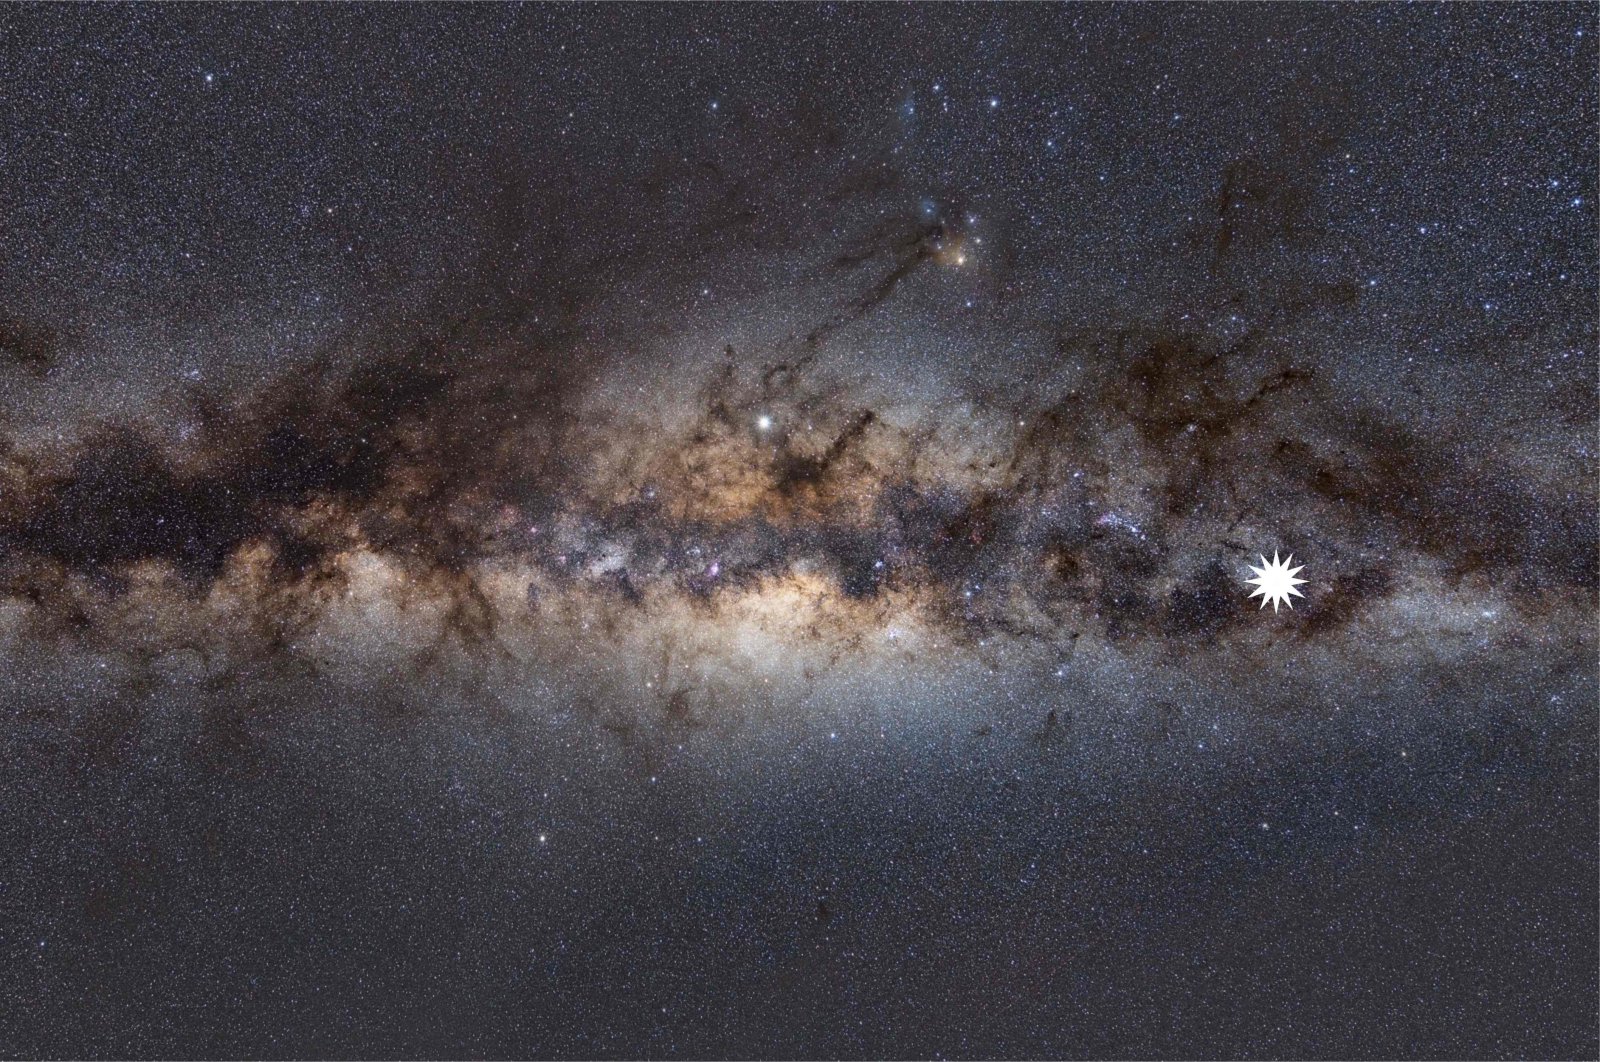 This handout image by astrophysicist Natasha Hurley-Walker from the Curtin University node of the International Center for Radio Astronomy Research (ICRAR) shows the Milky Way as viewed from Earth, with a star icon (at R-placed by source) marking the position of a mysterious repeating transient in space, Jan. 26, 2022. (Photo via AFP)